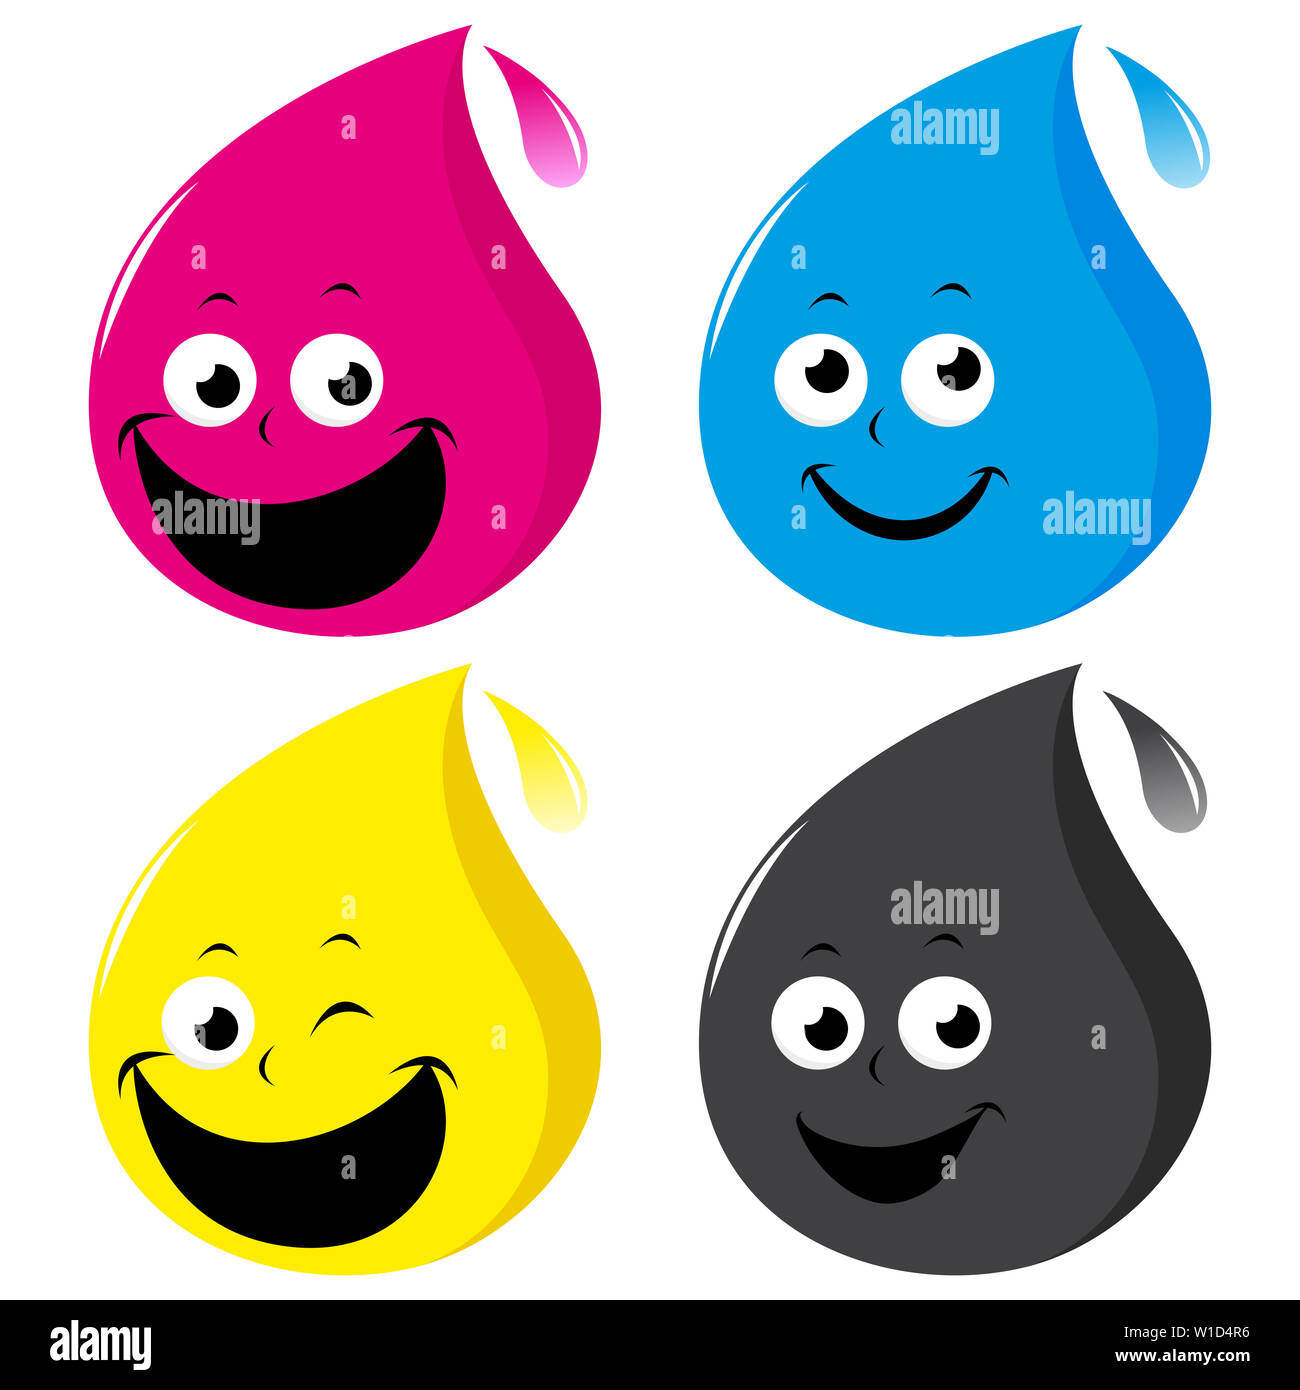 Illustration set of 4 cartoon ink drops in cyan, magenta, yellow and black colors. Stock Photo